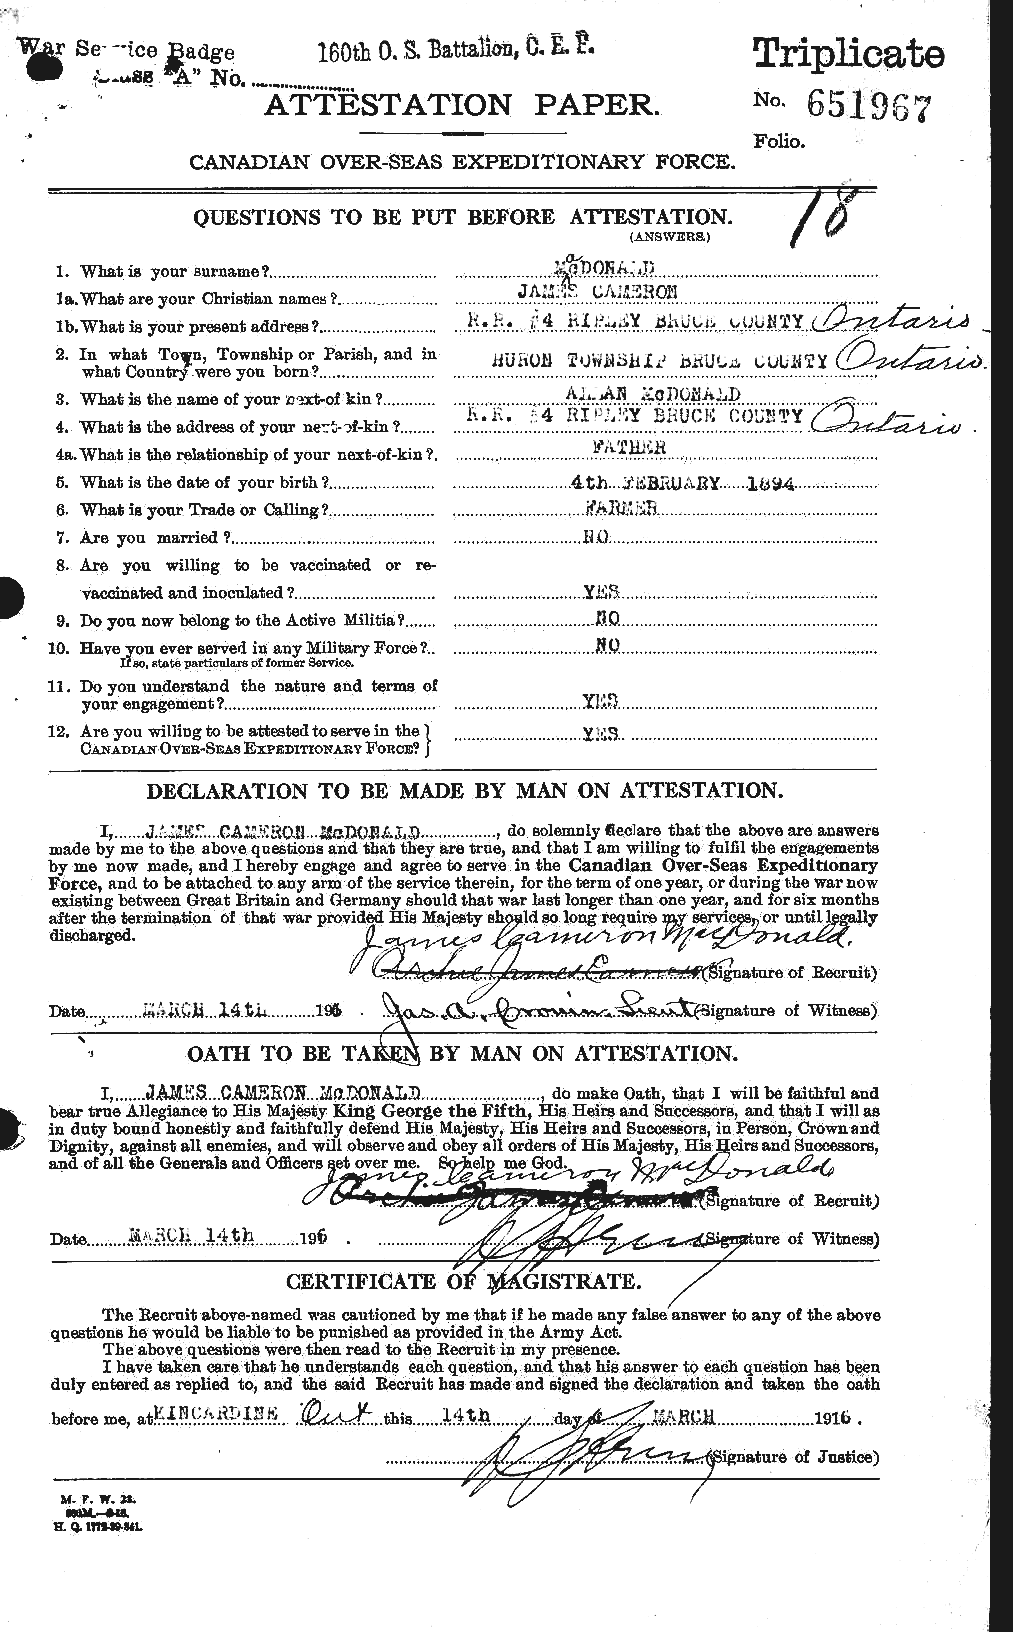 Personnel Records of the First World War - CEF 521653a